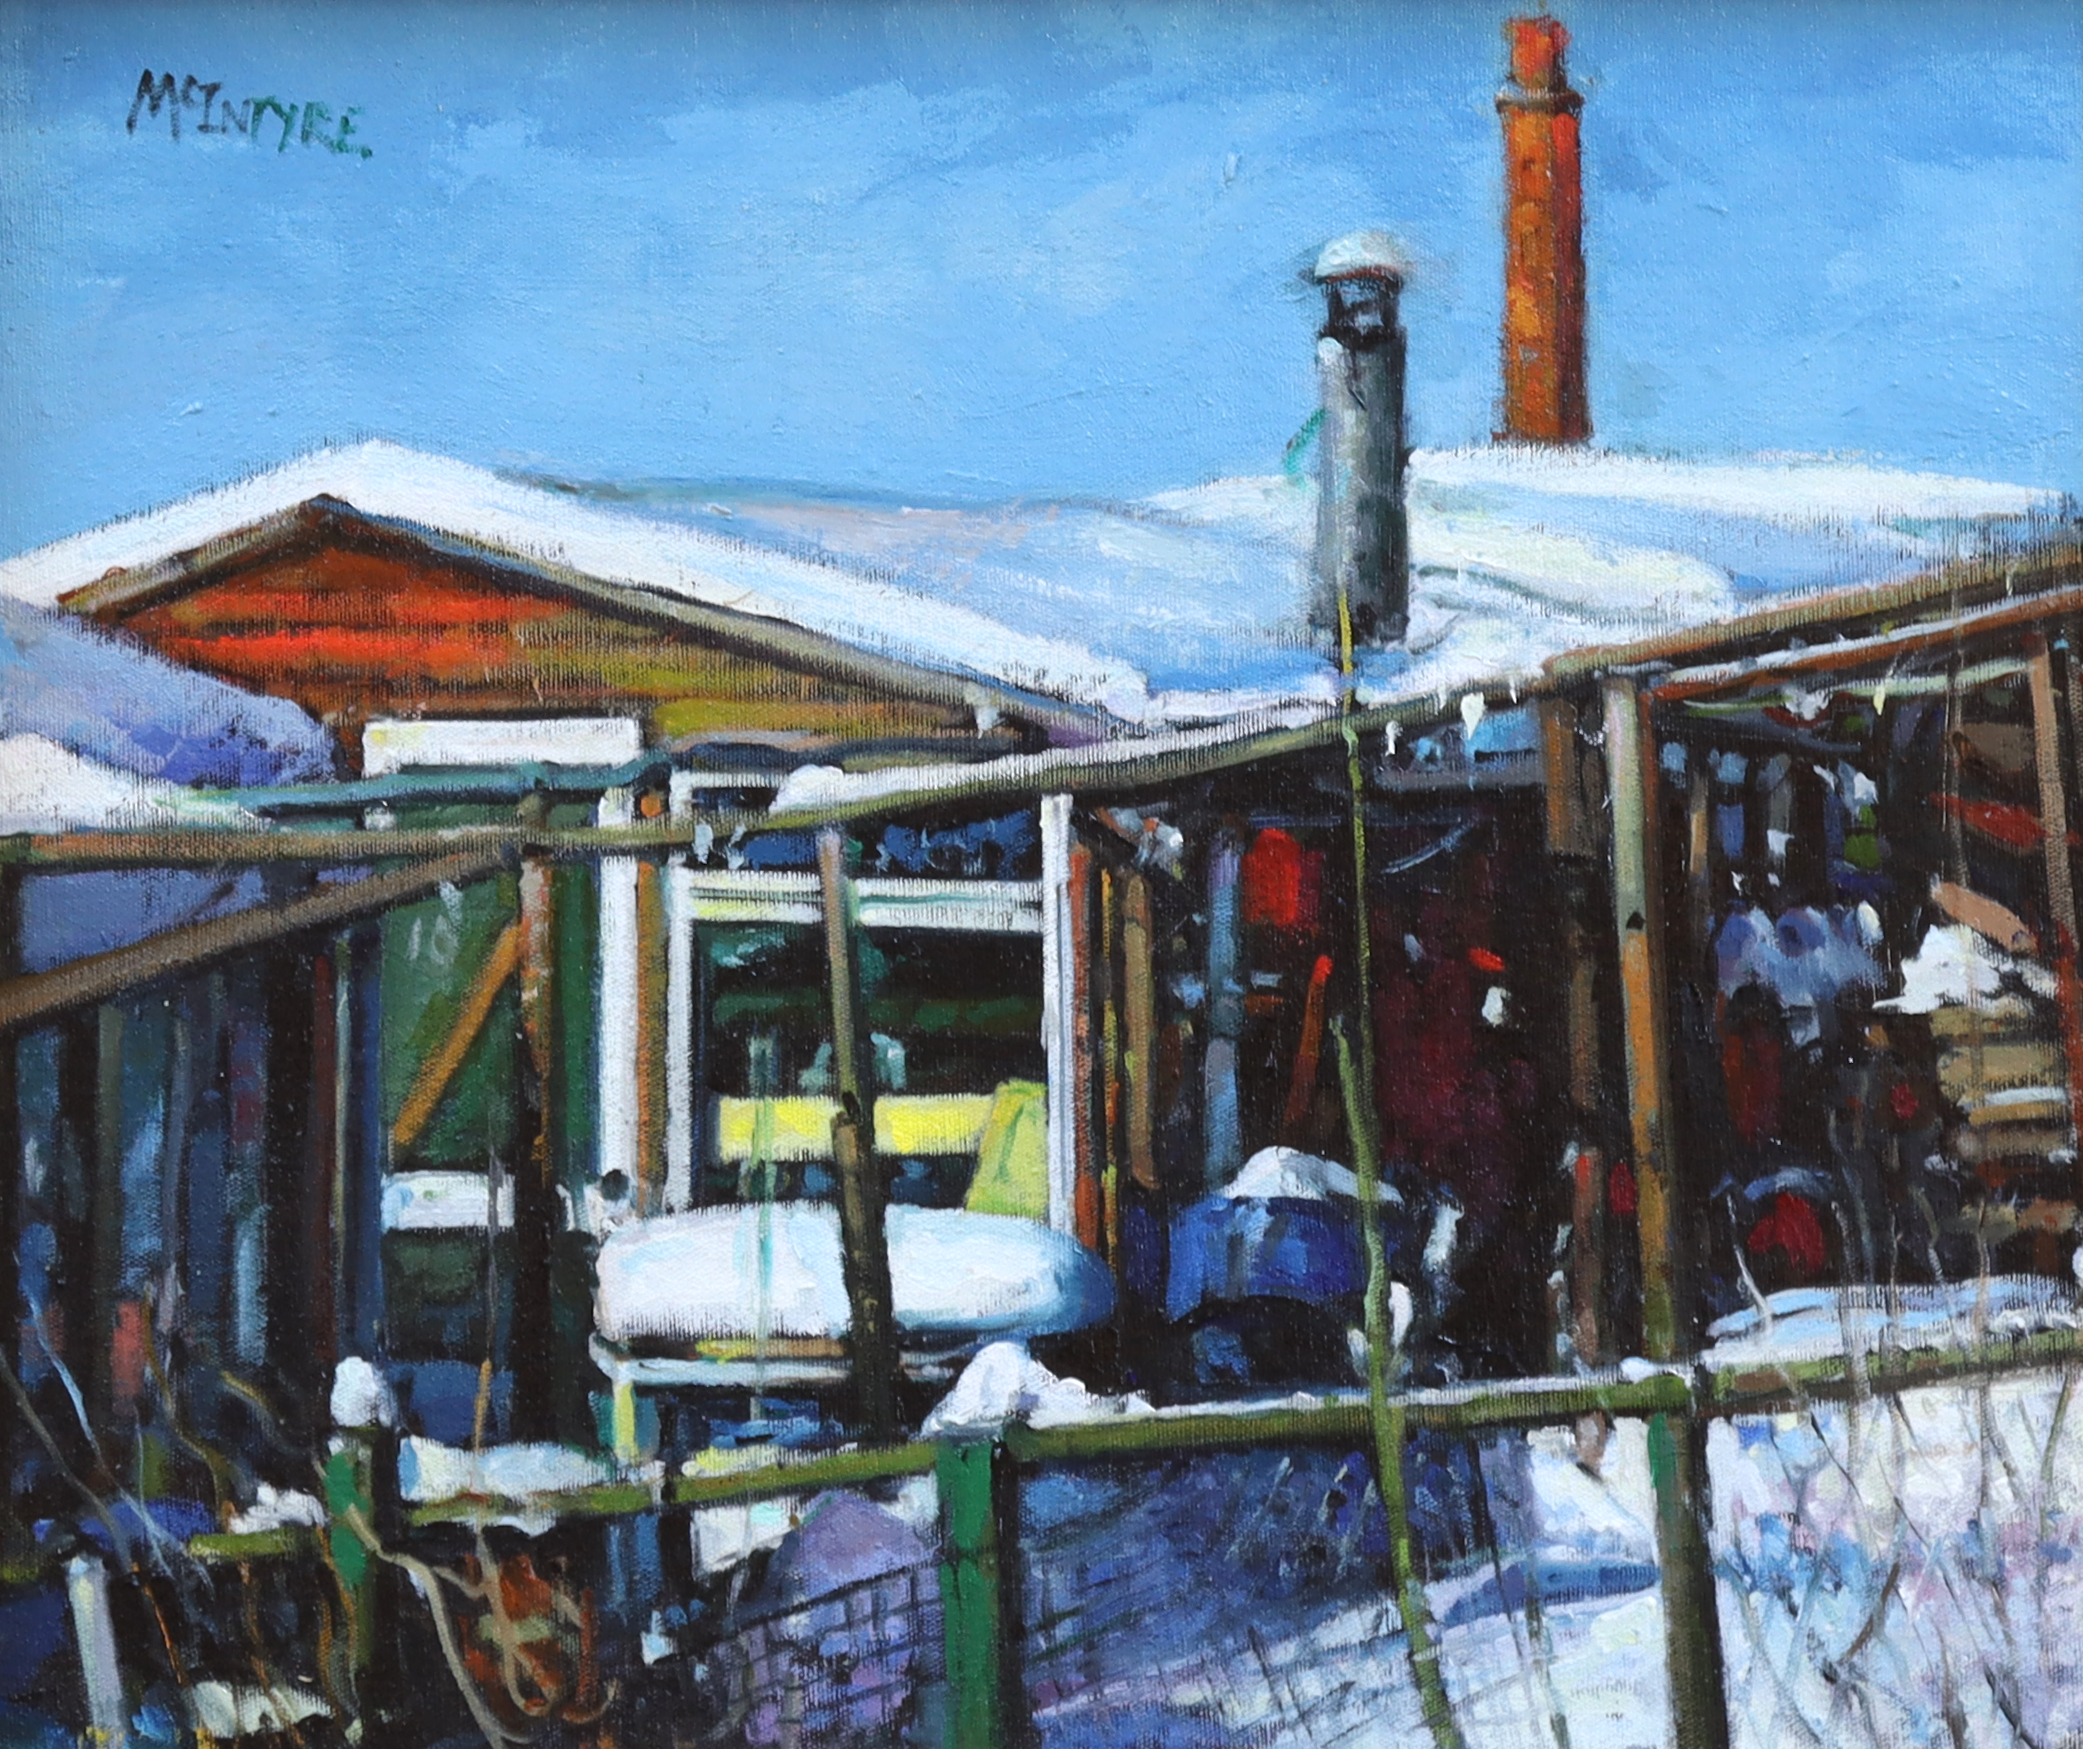 Joe_Mcintyre_Winter_In_the_City_Sunlight_Snow_Allotments_Dundee